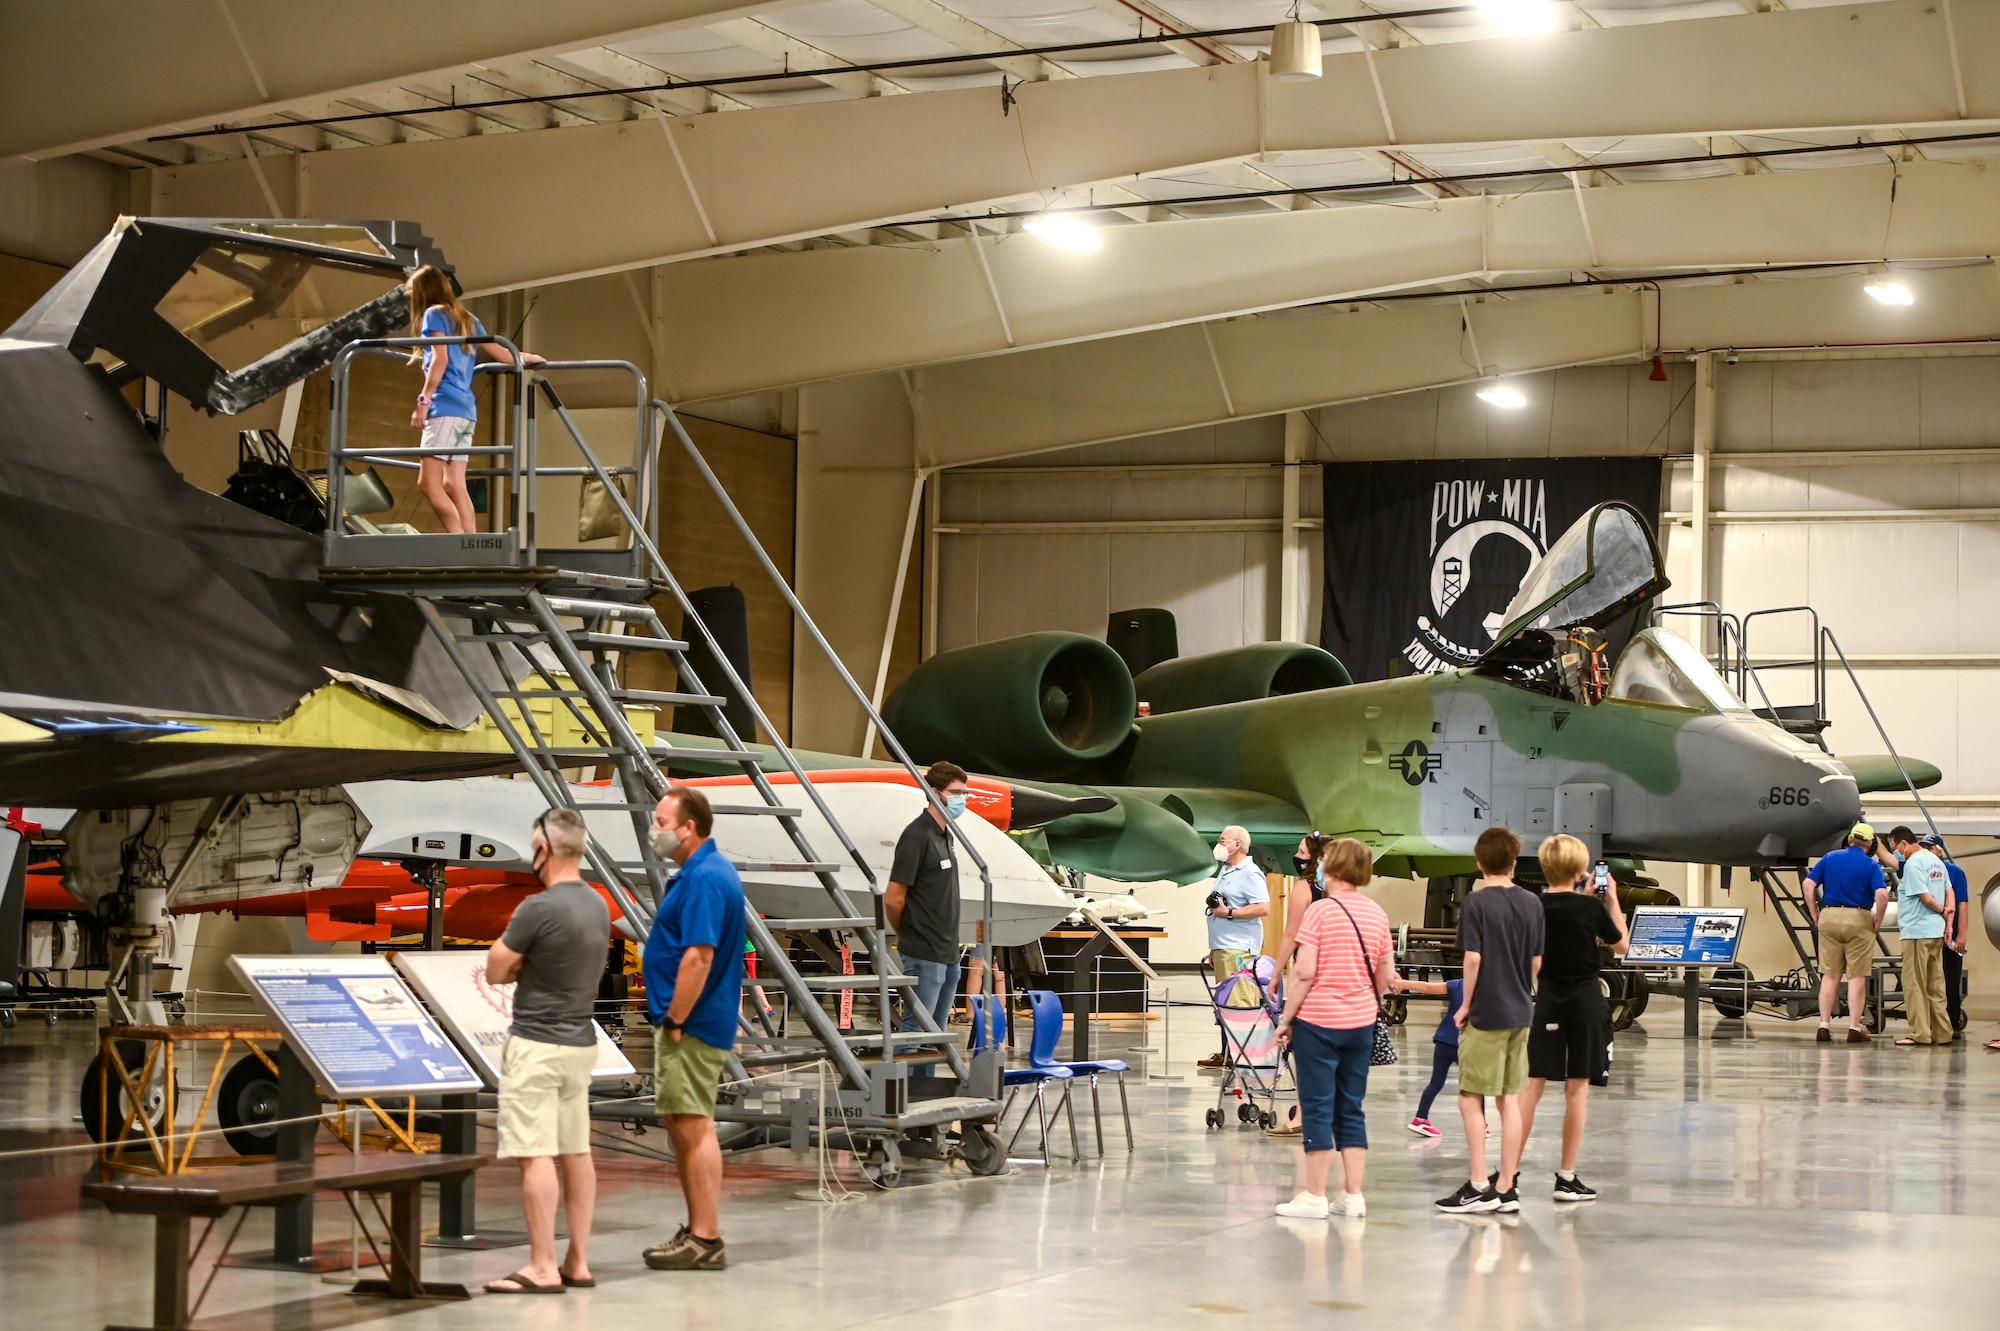 Visitors enjoy the open aircraft exhibits while visiting Hill Aerospace Museum Sept. 16, 2021, at Hill Air Force Base, Utah. The museum is offering special programs and exhibits during Top of Utah Museum Week, which runs through Sept. 18. (U.S. Air Force photo by Cynthia Griggs)